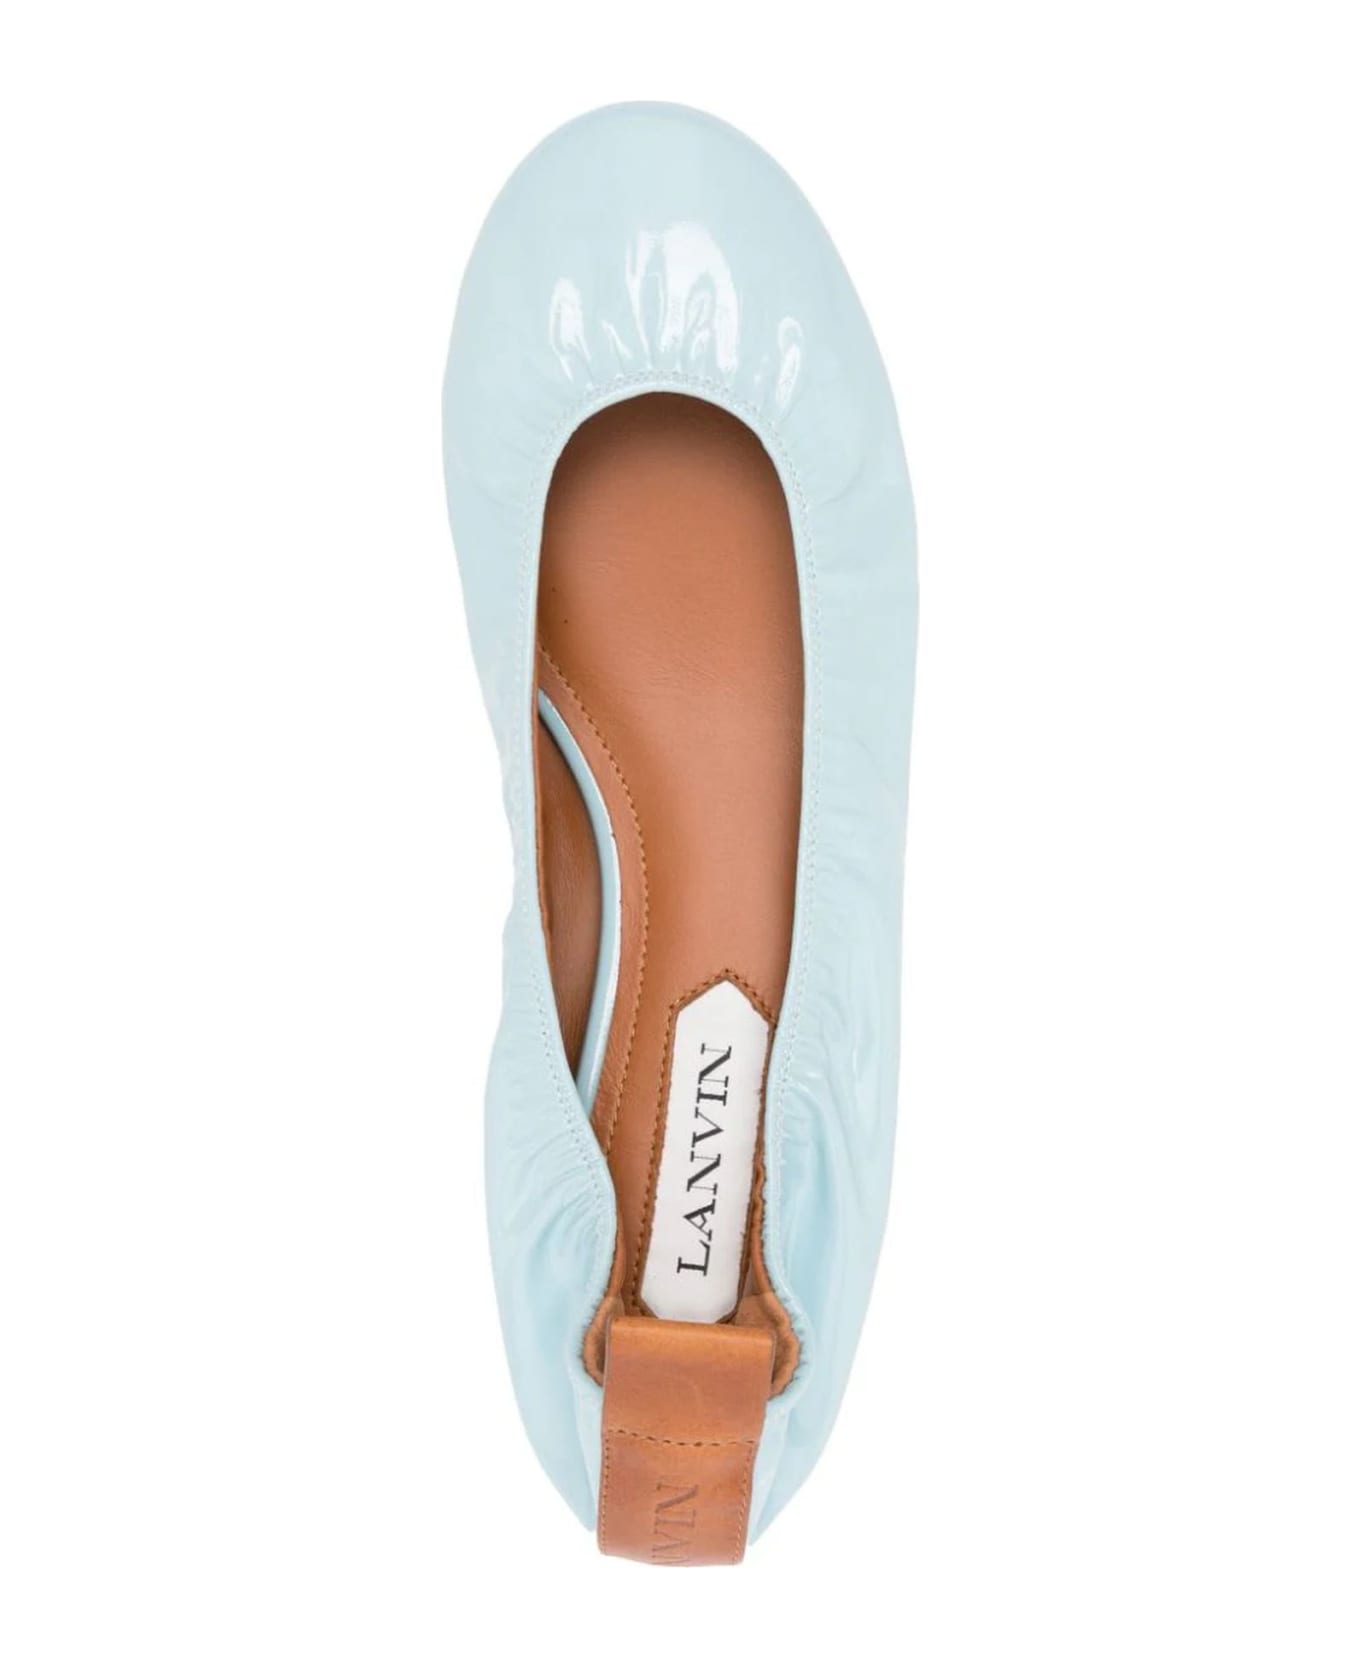 Lanvin Sky Blue Patent Leather Ballerina Shoes - Clear Blue